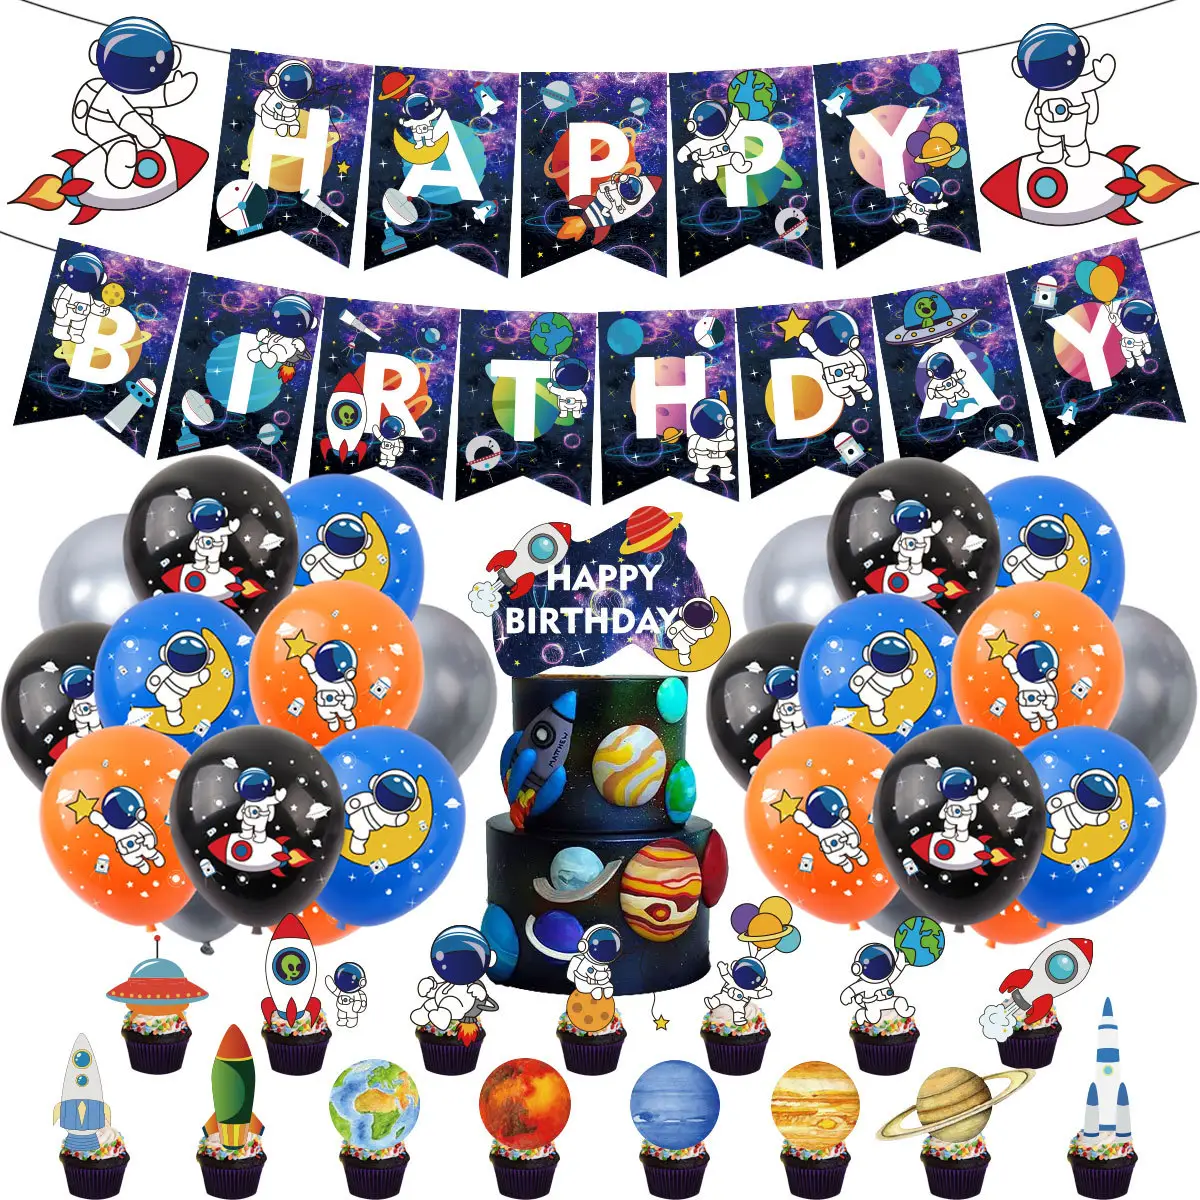 LUCKY Outer Space Astronaut Spaceman Theme Party Supplies Banner Kids Baby Boy Party Home Wall Decor Birthday Supplies Kit Set